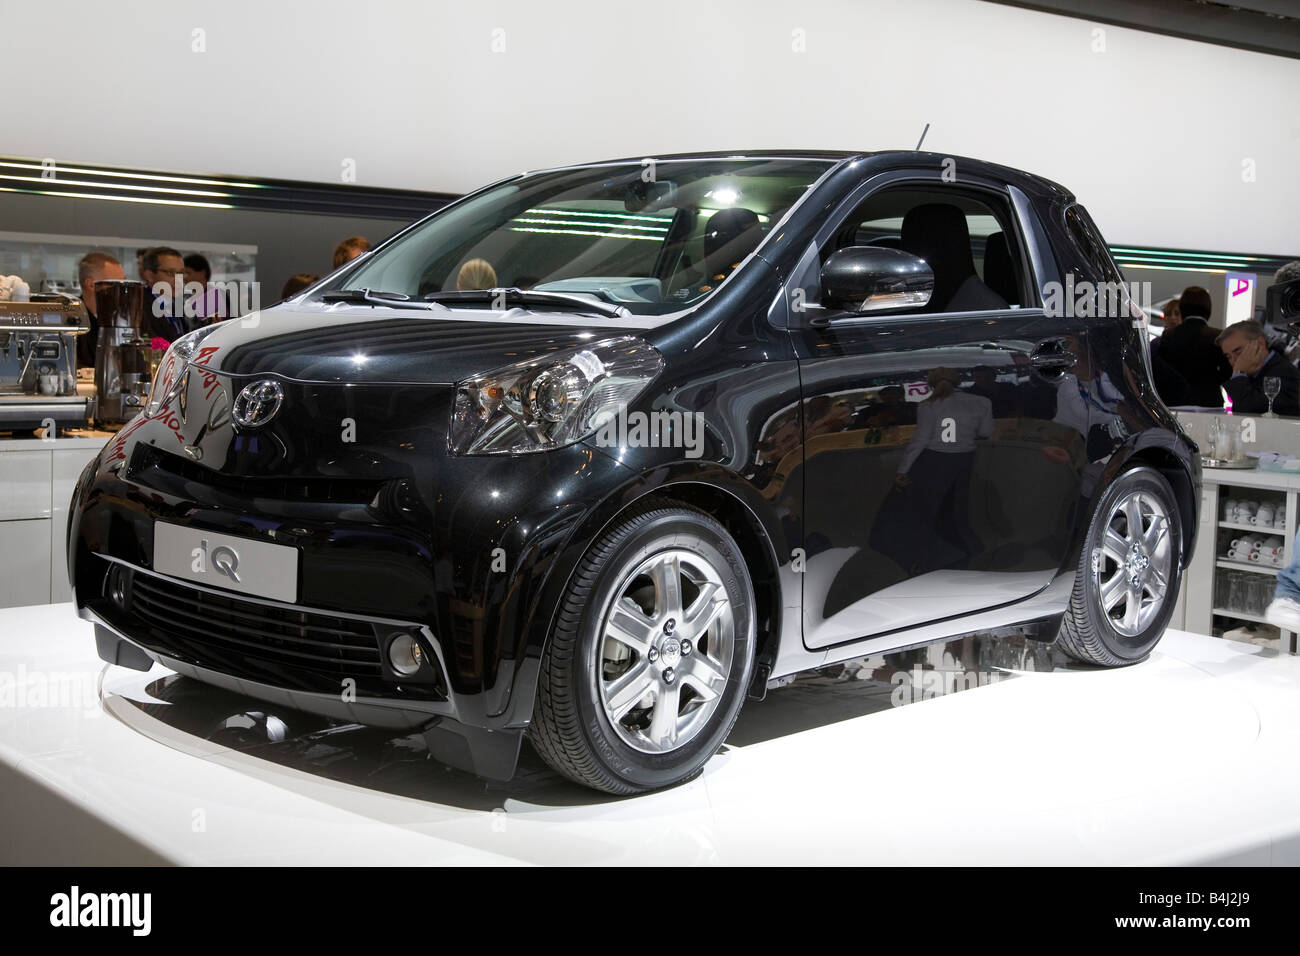 Toyota IQ. On show at a Motor Show 2008. The Mondial de l'Automobile. Stock Photo